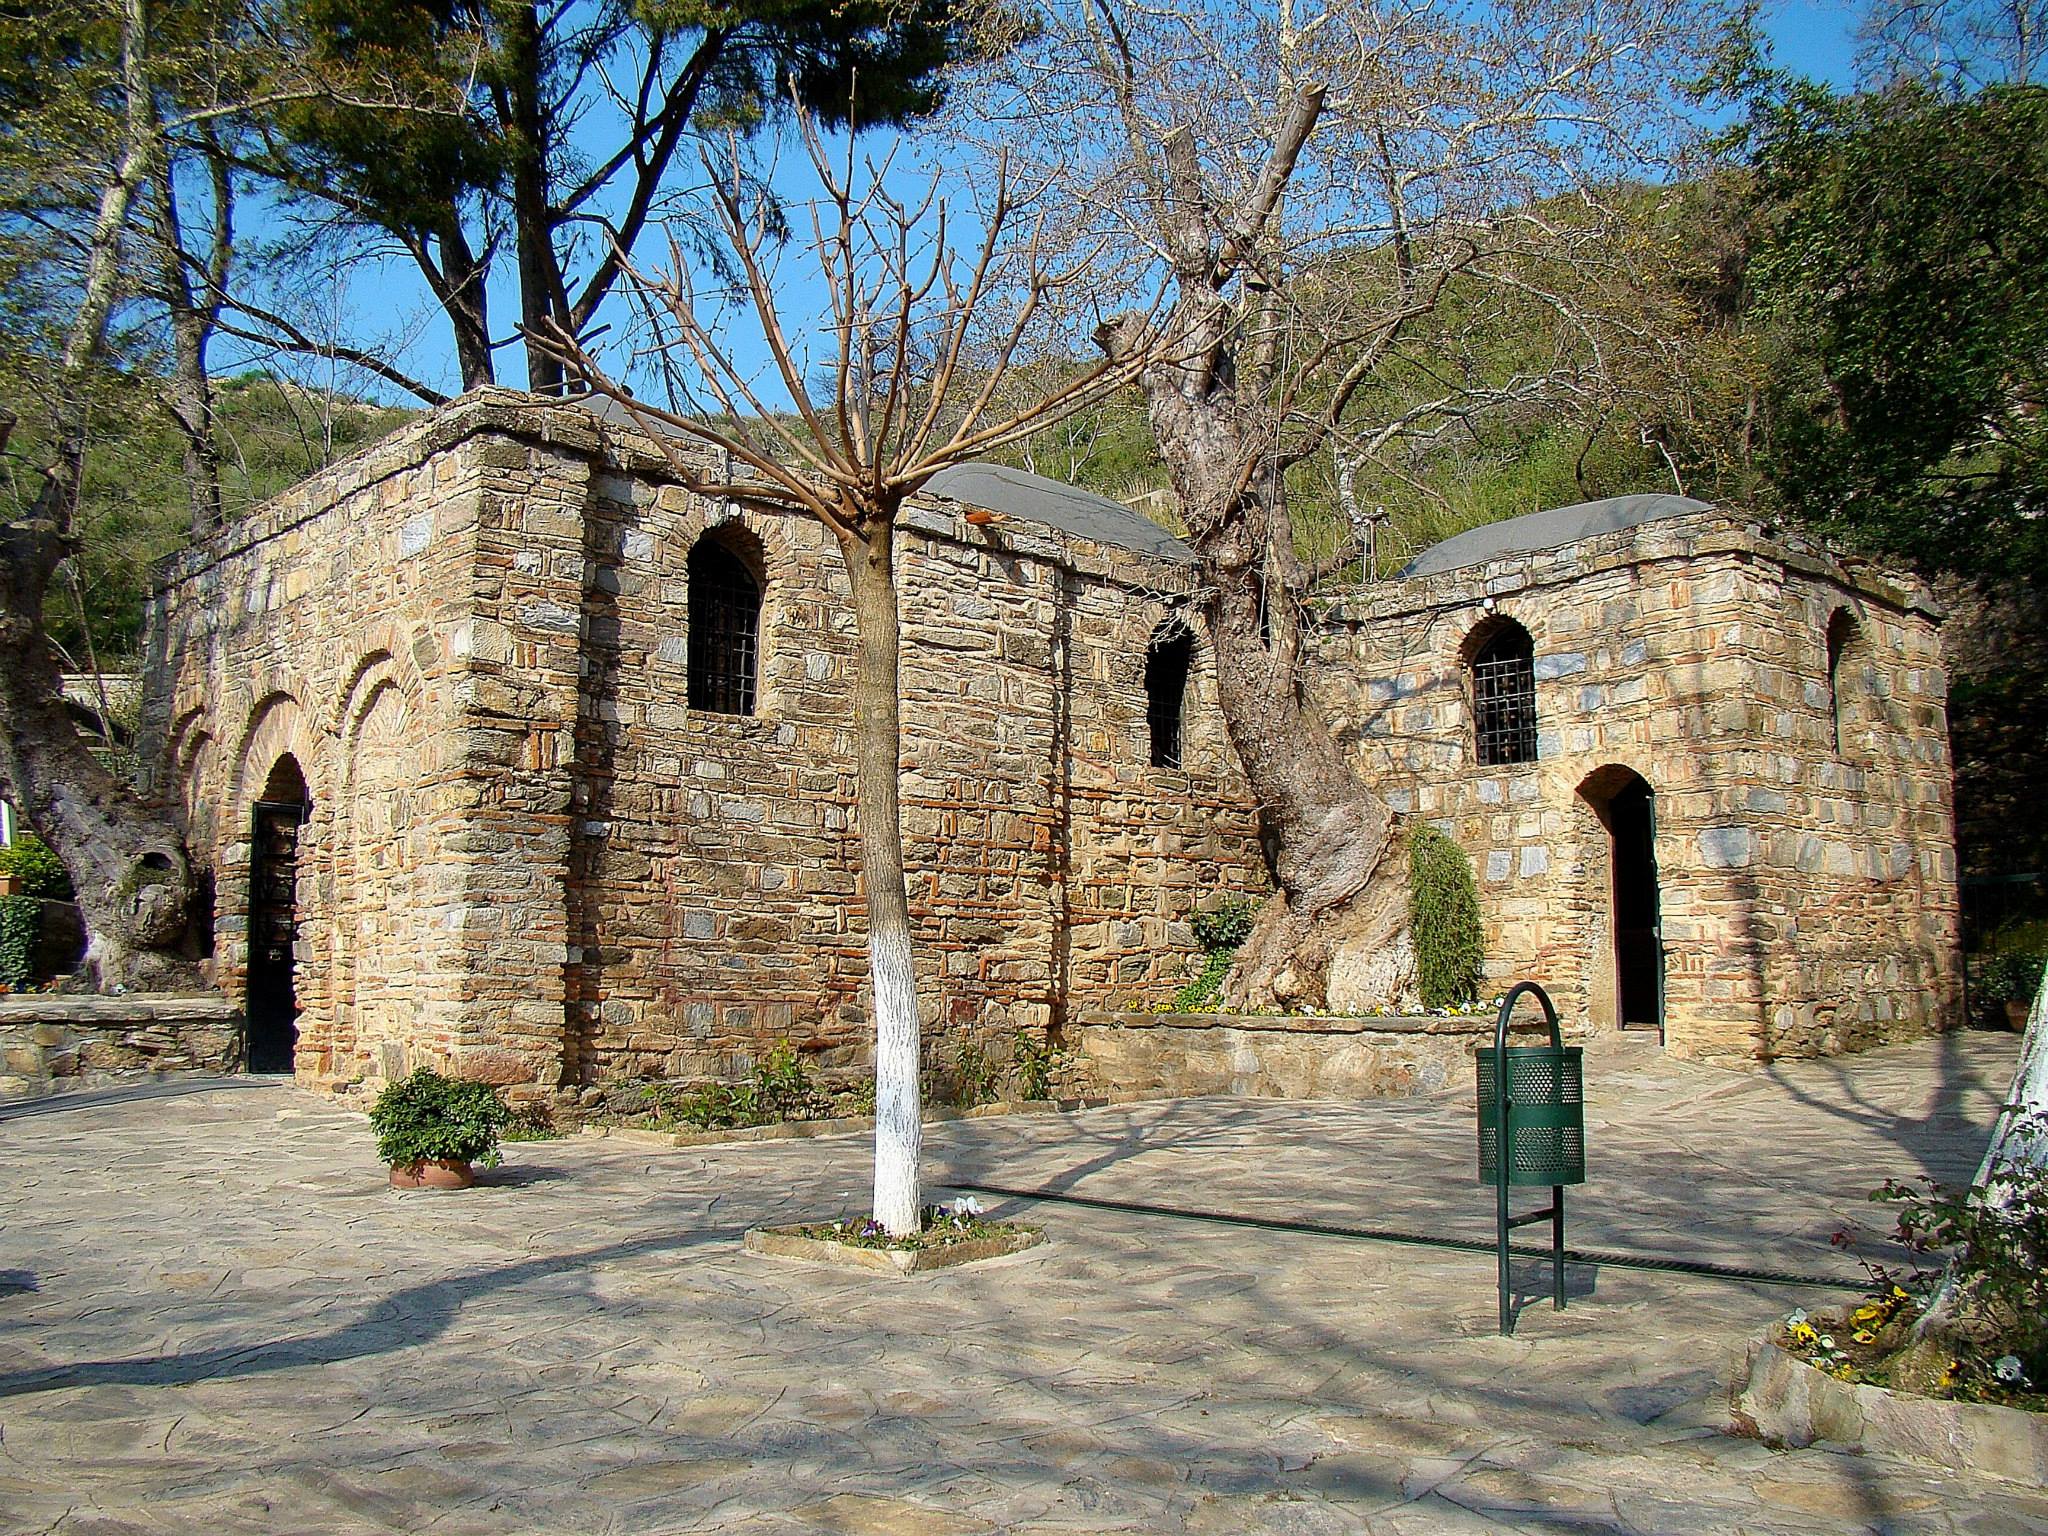 House Of The Virgin Mary In Ephesus - House Of The Virgin Mary - HD Wallpaper 